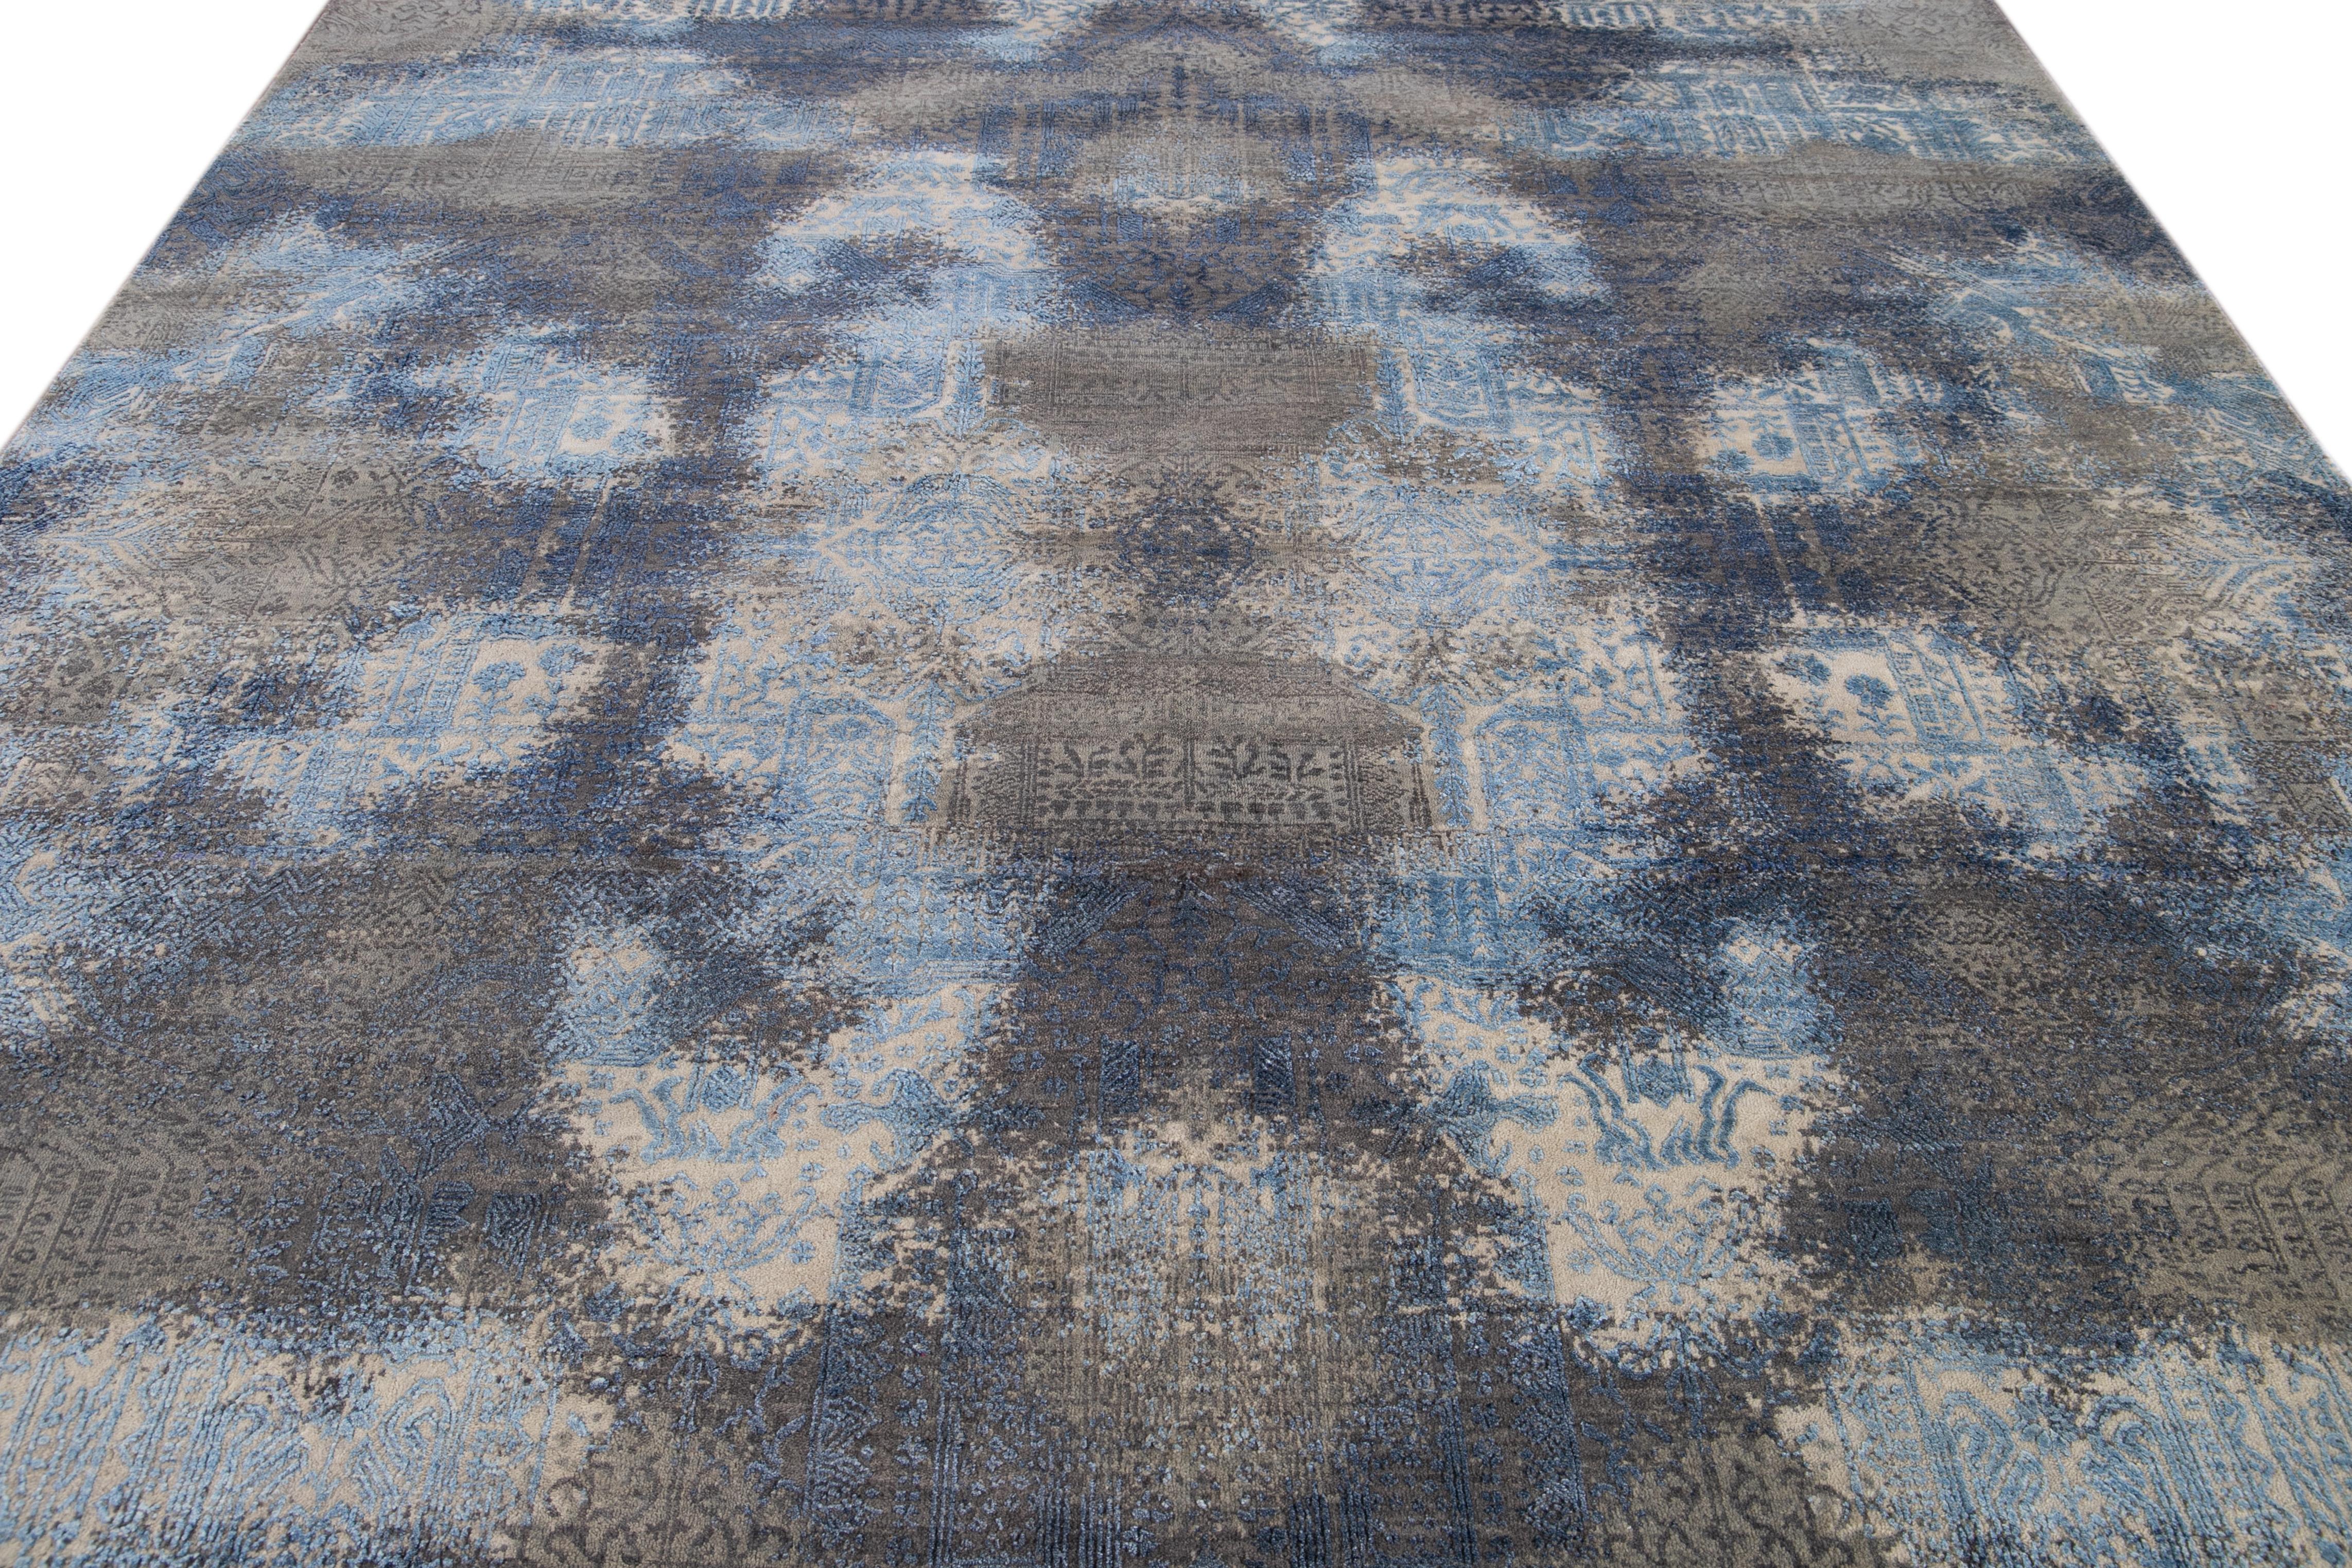 Beautiful modern hand knotted wool rug. This rug has a blue field with abstract accents of gray and light shades of blue all-over. 

This rug measures 10' 1